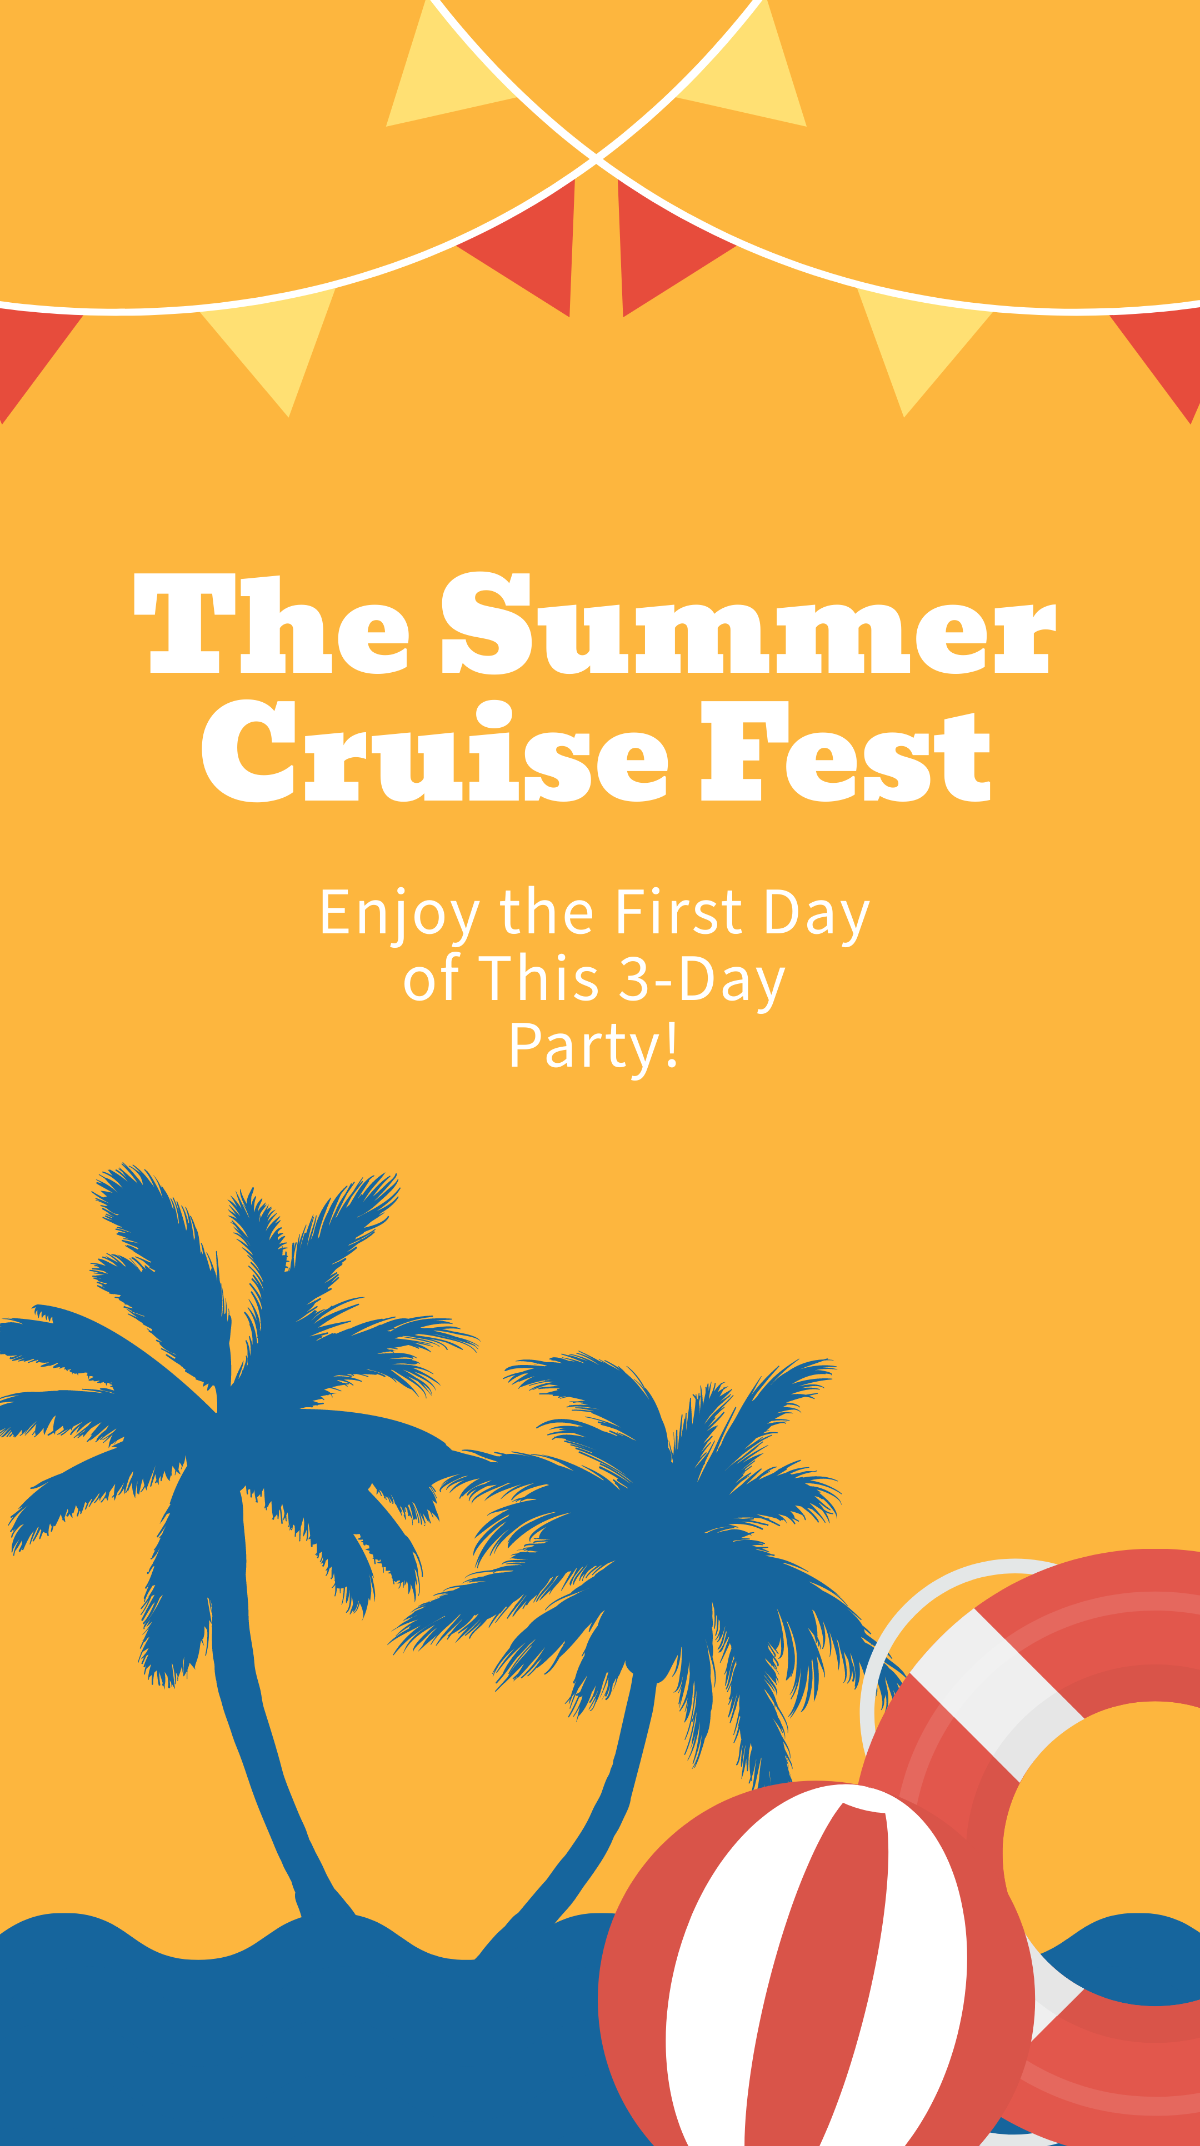 Free First Day of Summer Party Instagram Story Template